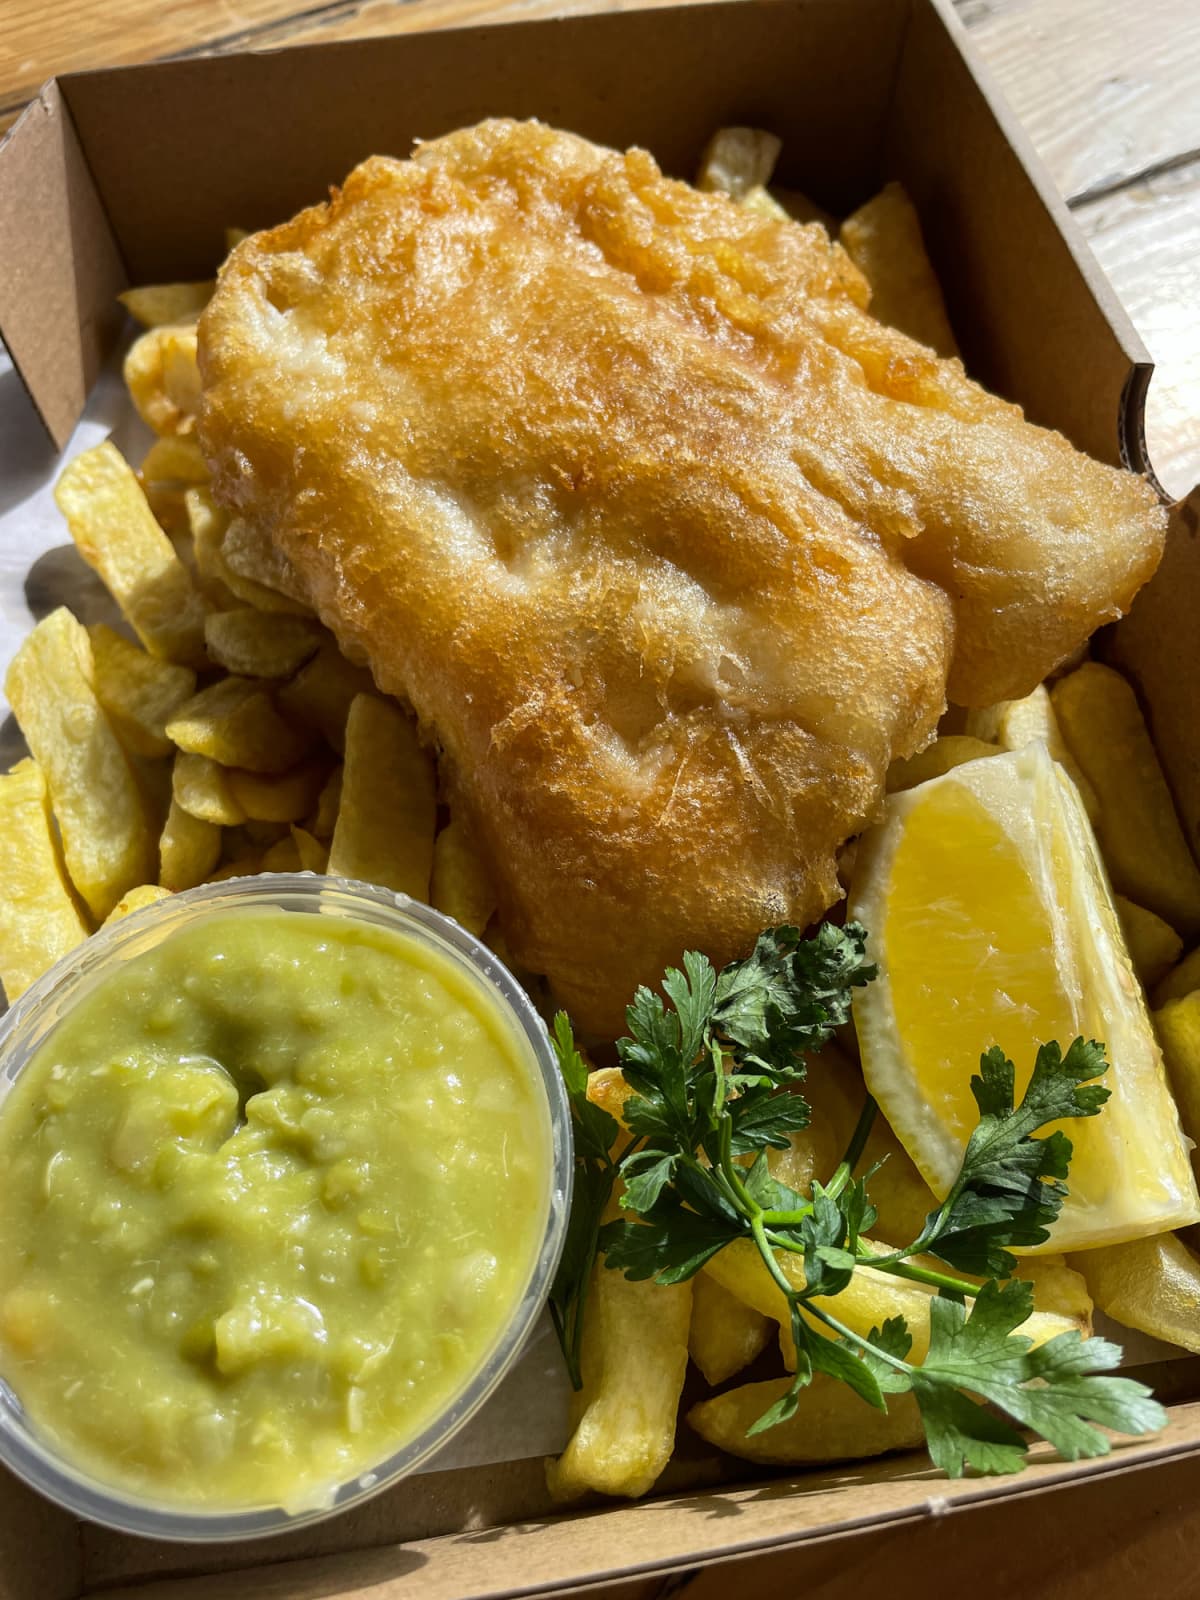 Battered cod and chips 